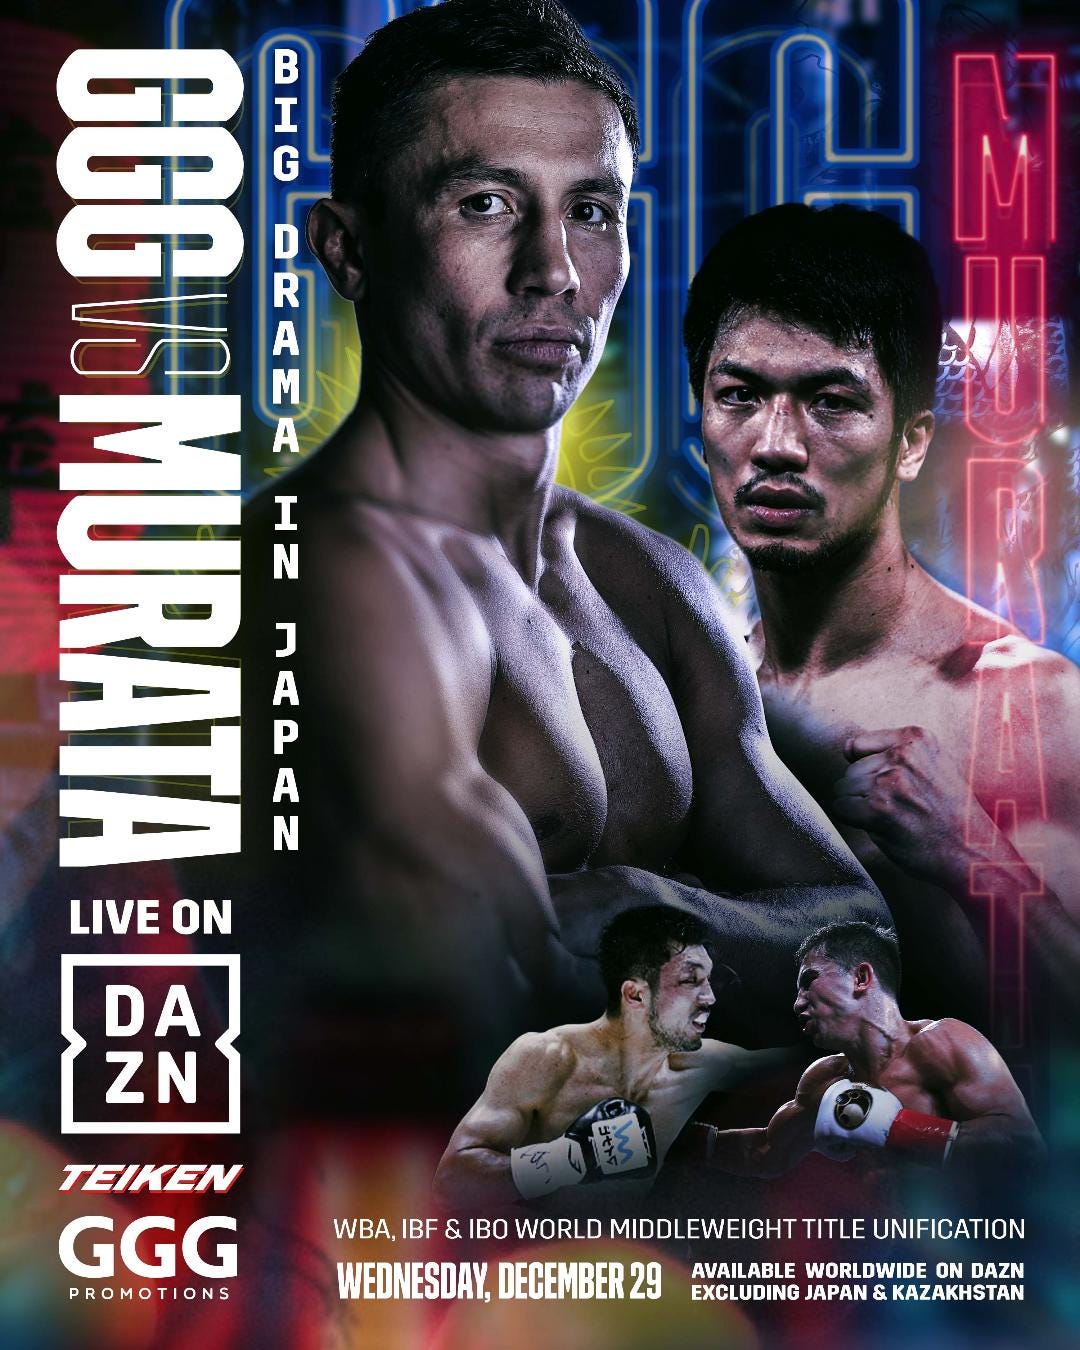 Done deal GGG, Murata to meet in middleweight unification bout on Dec